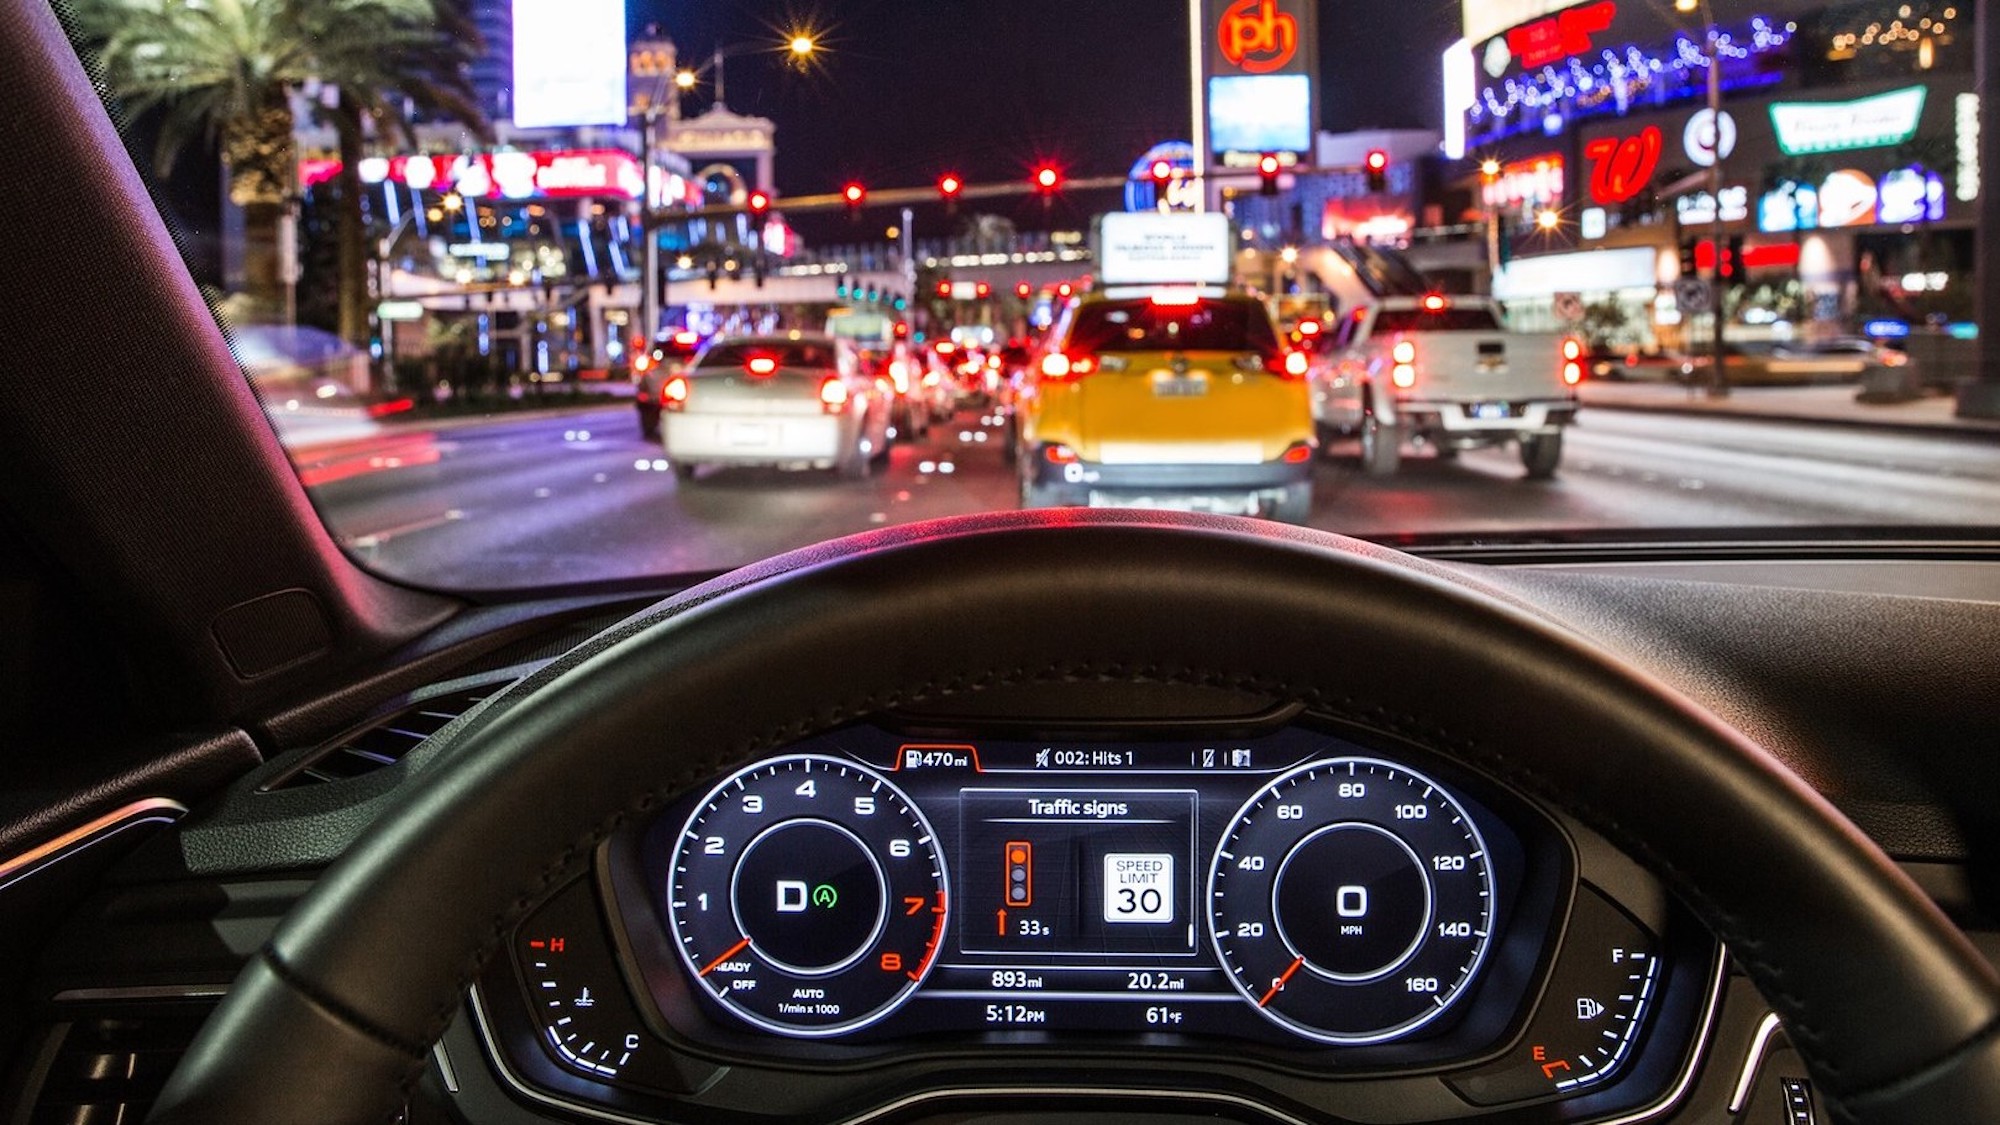 Audi’s new tech can help you beat red lights